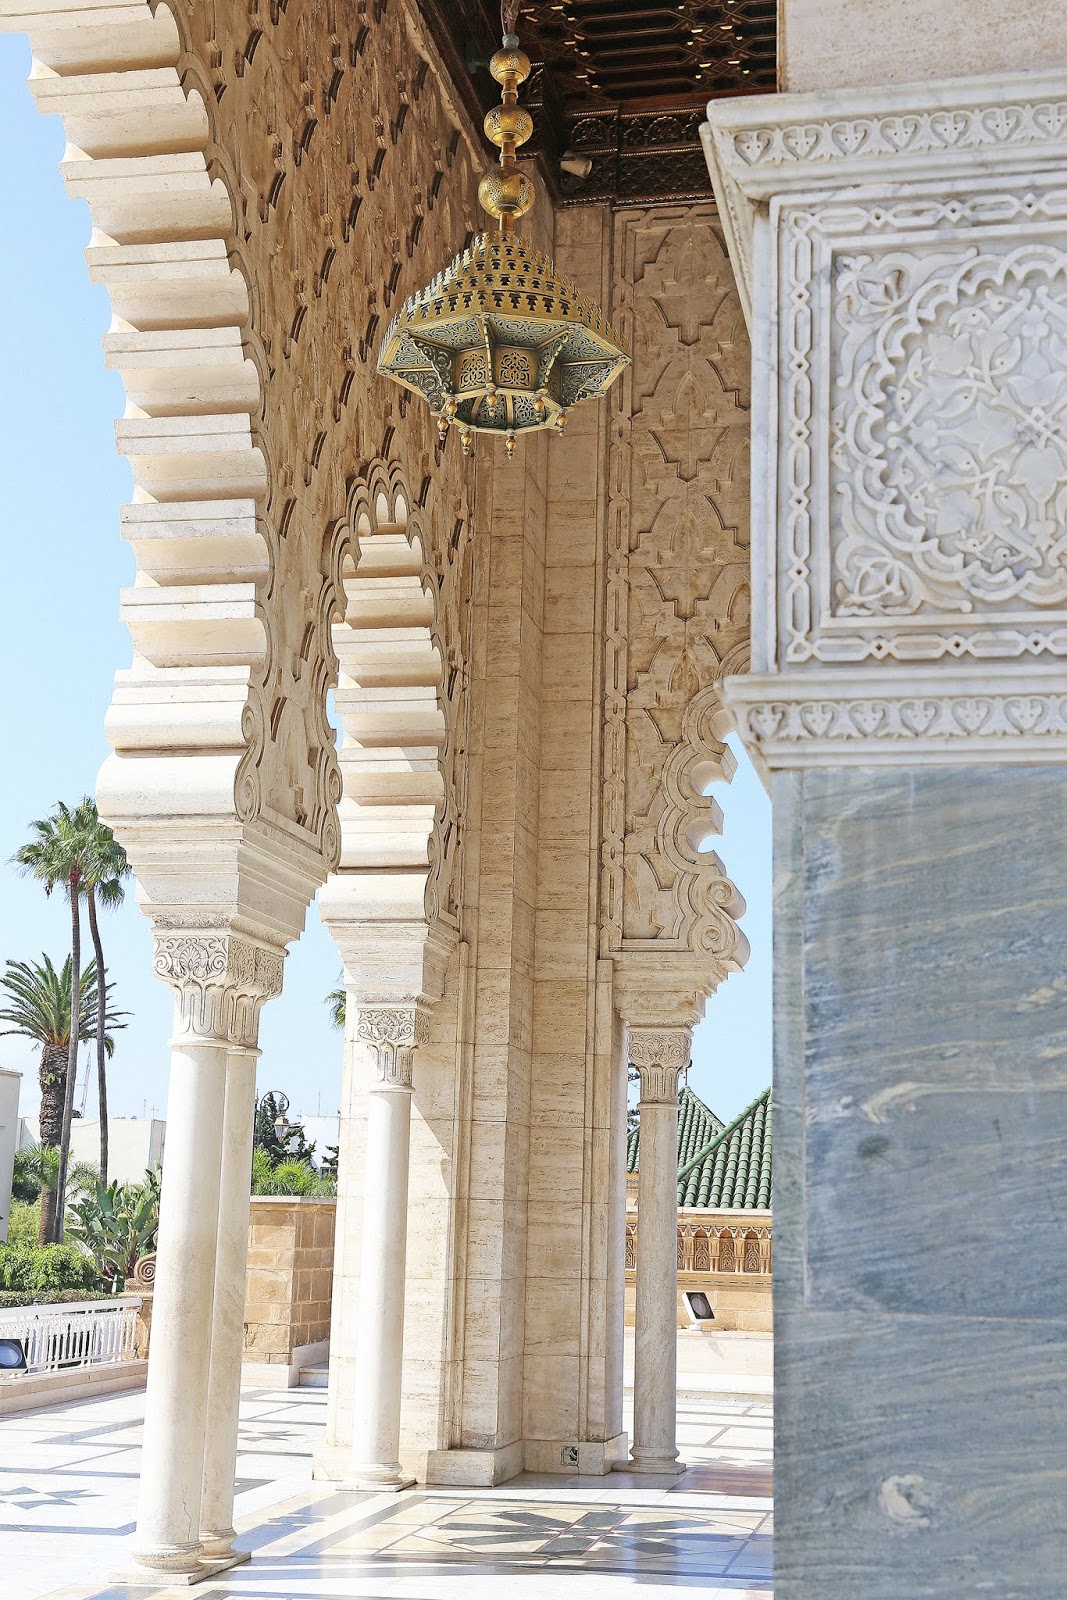 The Morocco Diaries, Part 2 of 10: The Imperial Cities of Rabat and Meknes by Posh, Broke, & Bored